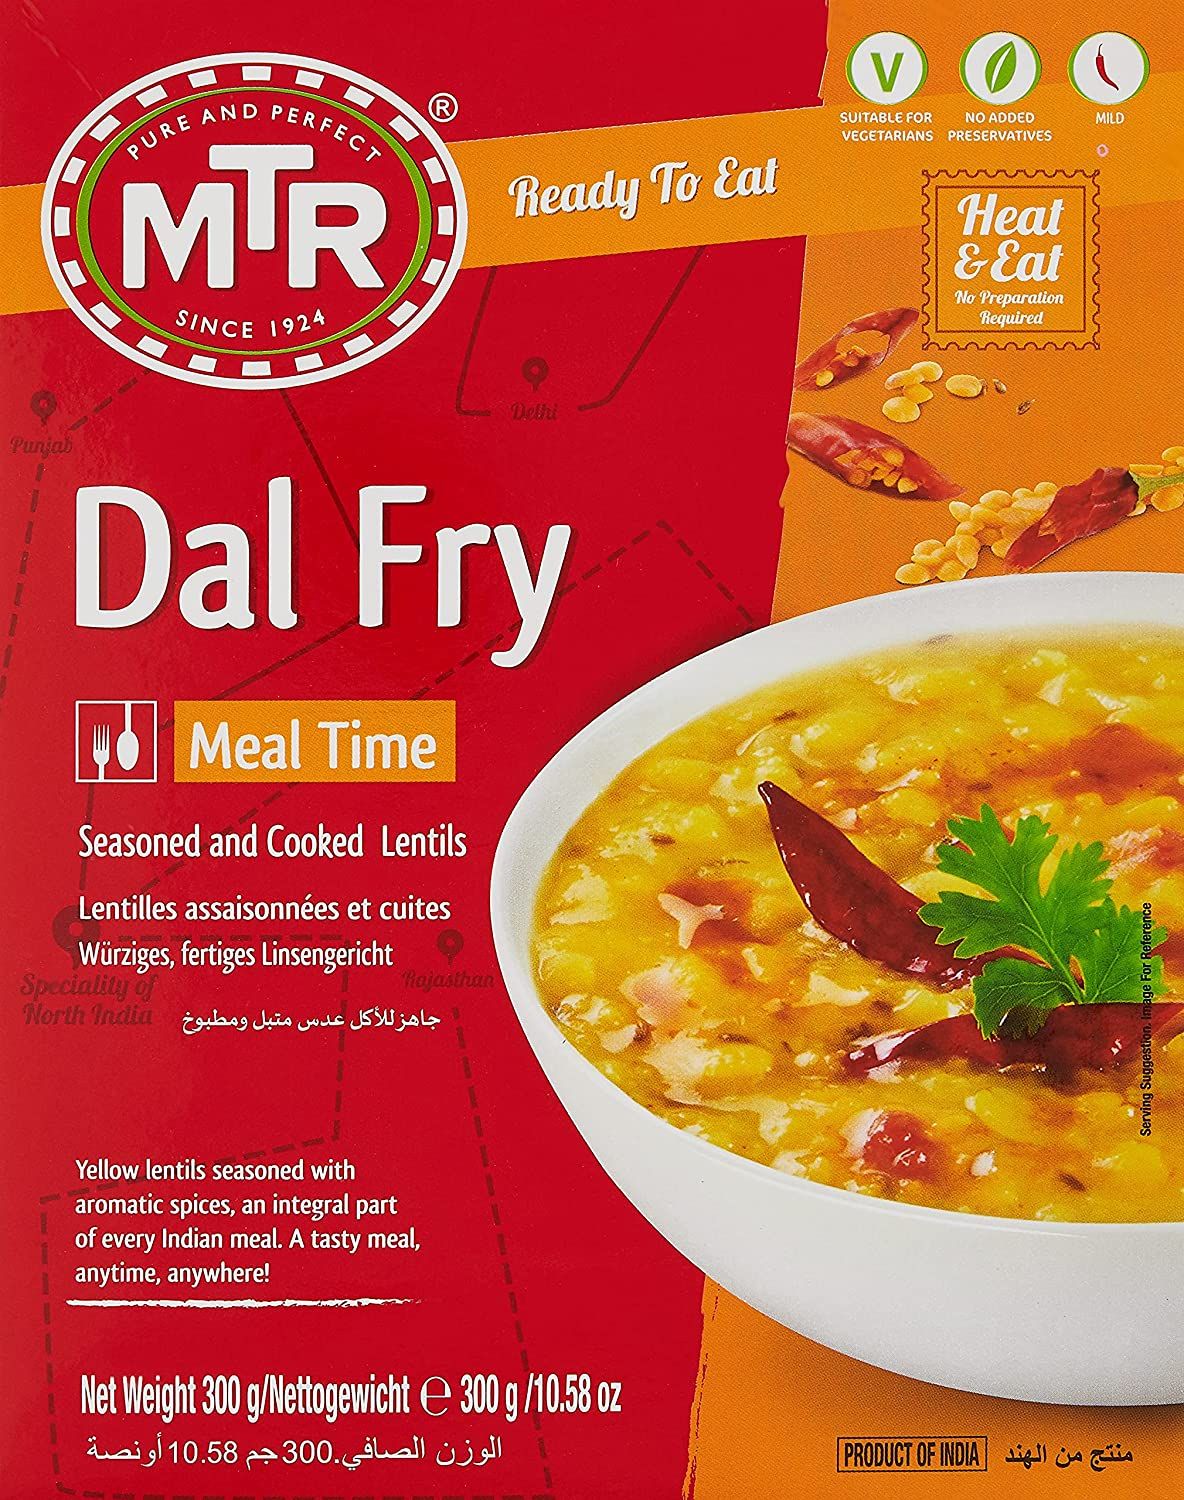 MTR Ready To Eat Dal Fry Image